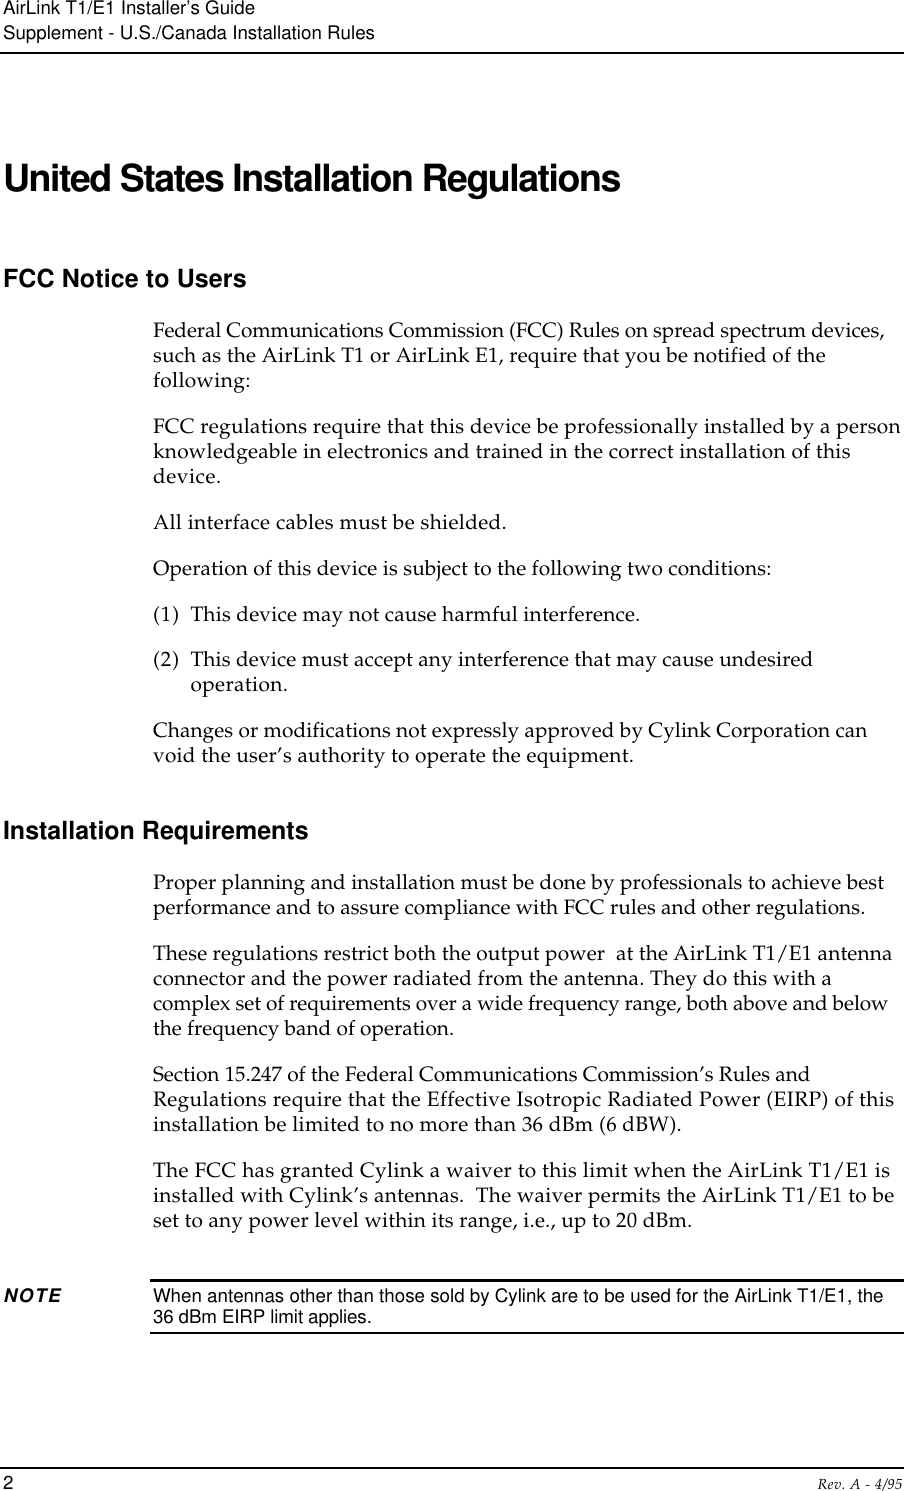 AirLink T1/E1 Installer’s GuideSupplement - U.S./Canada Installation Rules2Rev. A - 4/95United States Installation RegulationsFCC Notice to UsersFederal Communications Commission (FCC) Rules on spread spectrum devices,such as the AirLink T1 or AirLink E1, require that you be notified of thefollowing:FCC regulations require that this device be professionally installed by a personknowledgeable in electronics and trained in the correct installation of thisdevice.All interface cables must be shielded.Operation of this device is subject to the following two conditions:(1) This device may not cause harmful interference.(2) This device must accept any interference that may cause undesiredoperation.Changes or modifications not expressly approved by Cylink Corporation canvoid the user’s authority to operate the equipment.Installation RequirementsProper planning and installation must be done by professionals to achieve bestperformance and to assure compliance with FCC rules and other regulations.These regulations restrict both the output power  at the AirLink T1/E1 antennaconnector and the power radiated from the antenna. They do this with acomplex set of requirements over a wide frequency range, both above and belowthe frequency band of operation.Section 15.247 of the Federal Communications Commission’s Rules andRegulations require that the Effective Isotropic Radiated Power (EIRP) of thisinstallation be limited to no more than 36 dBm (6 dBW).The FCC has granted Cylink a waiver to this limit when the AirLink T1/E1 isinstalled with Cylink’s antennas.  The waiver permits the AirLink T1/E1 to beset to any power level within its range, i.e., up to 20 dBm.NOTE When antennas other than those sold by Cylink are to be used for the AirLink T1/E1, the36 dBm EIRP limit applies.